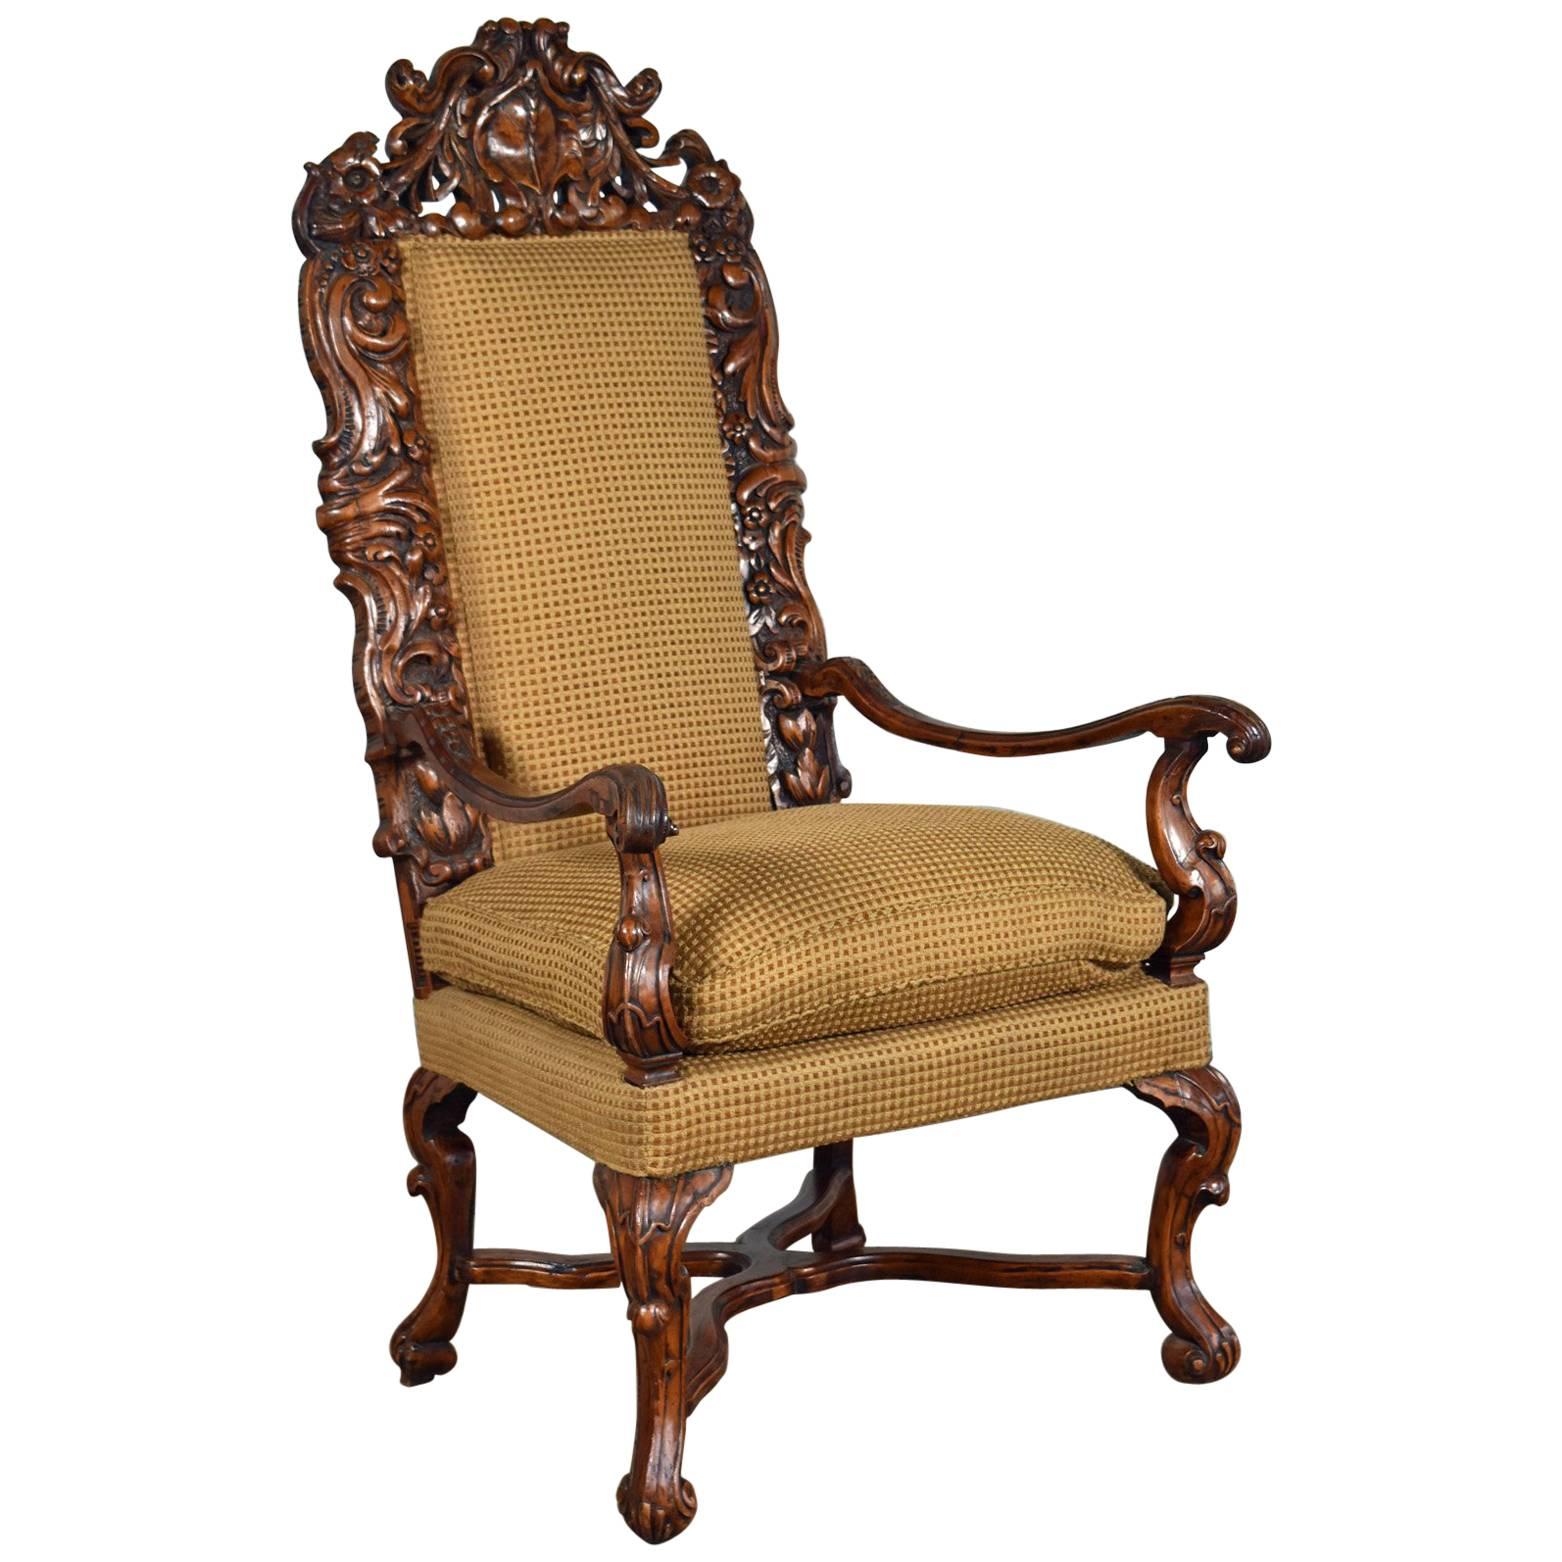 Early 18th Century Regence Northern French / Flemish Oversized Armchair For Sale